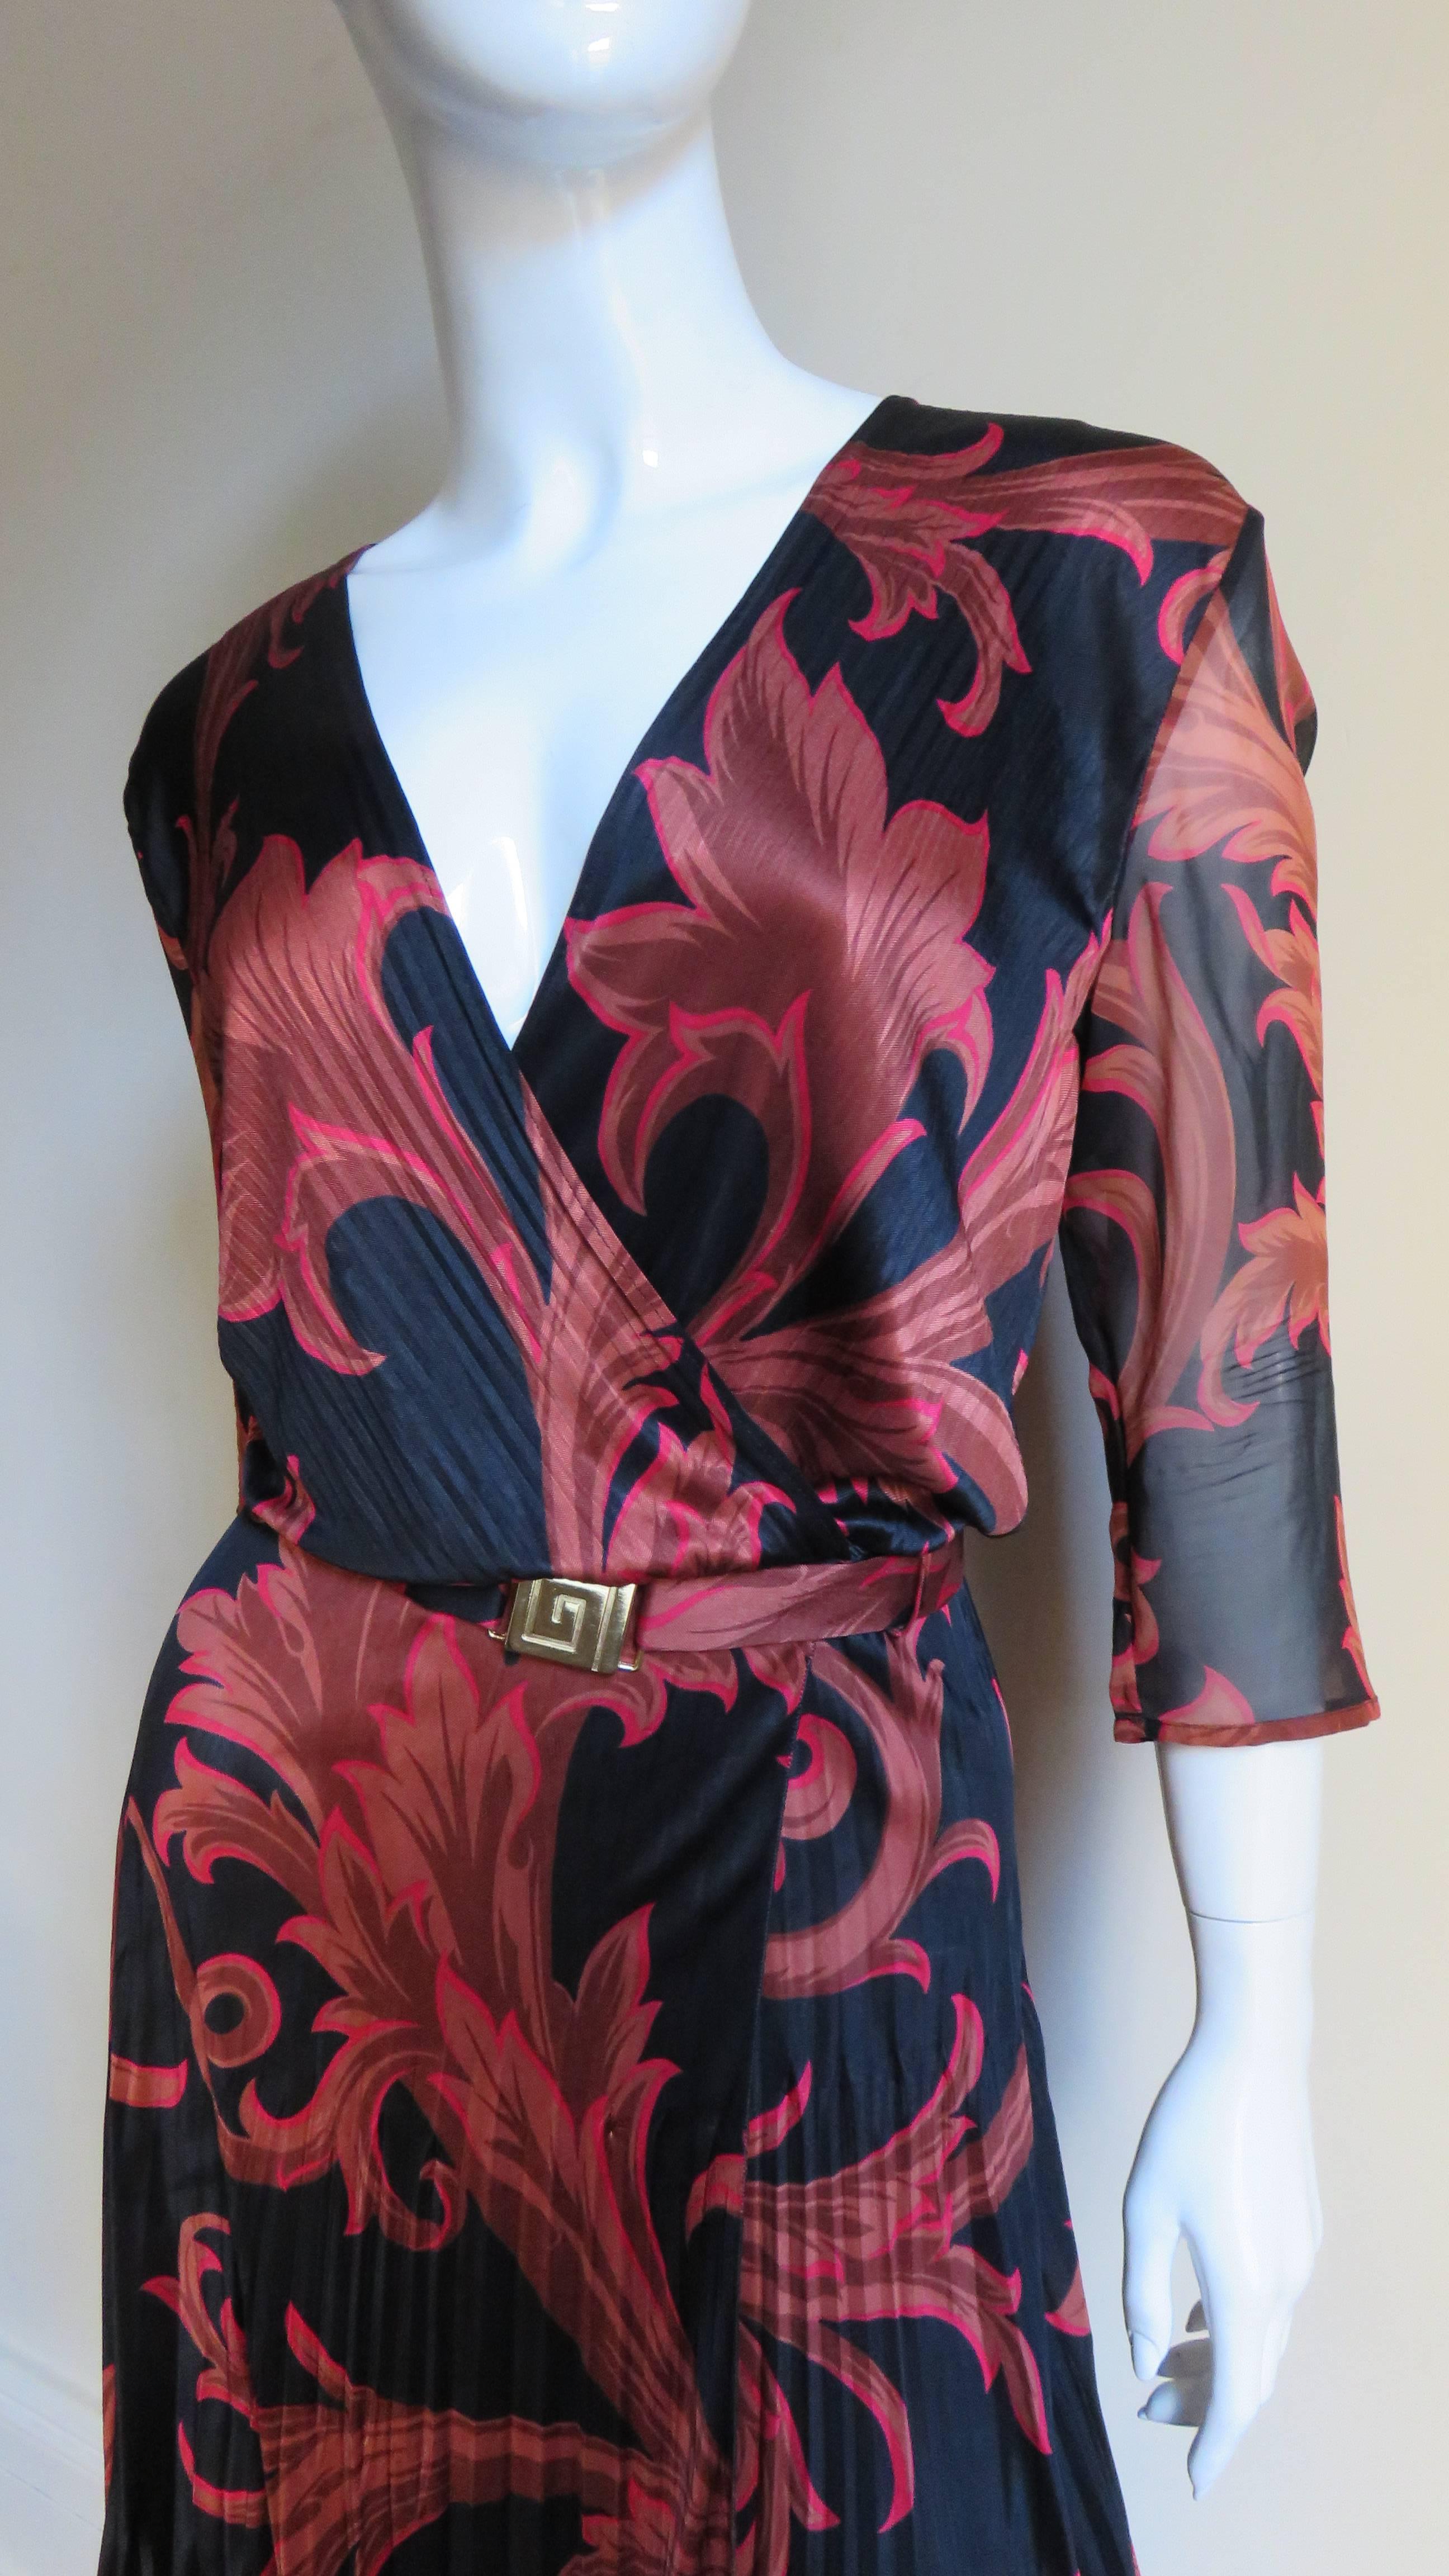 A great silk knit dress from Gainni Versace Couture in one of his infamous baroque prints of scrolls and abstract patterns in shades of tan outlined in red on a black background.  The body of the dress consists of a fine silk with a small linear